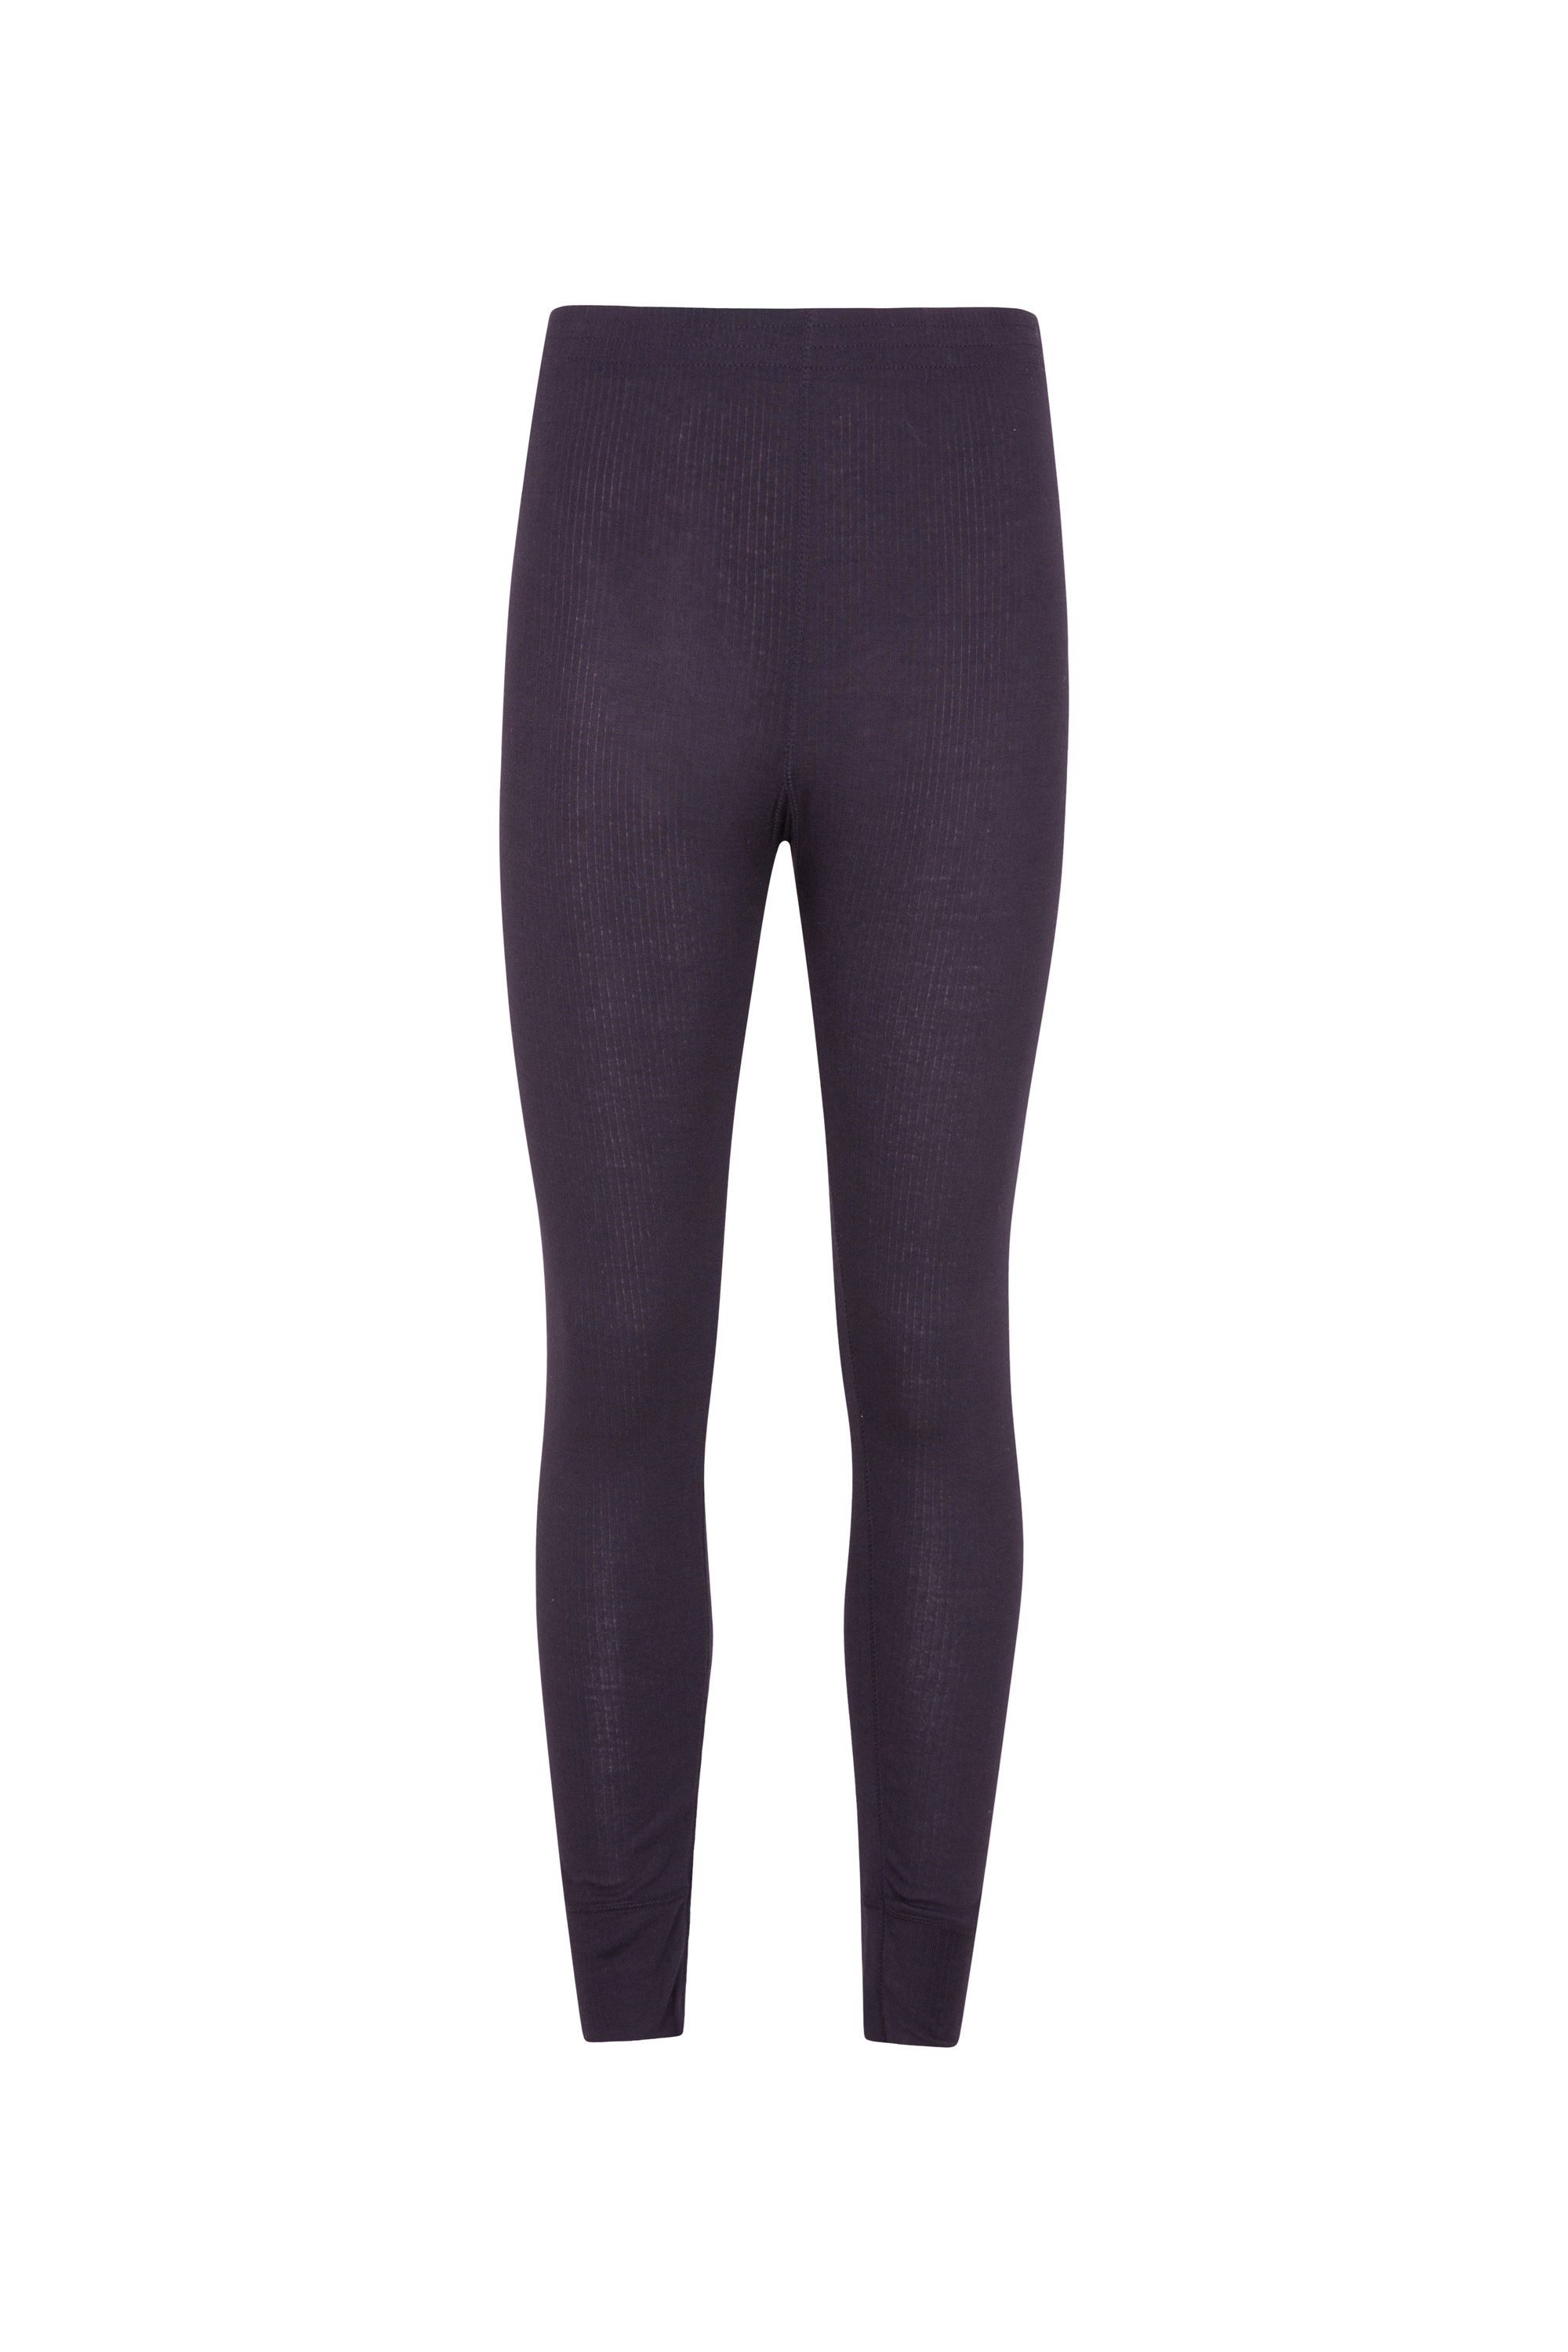 Buy Mountain Warehouse Purple Talus Kids Thermal Trousers from